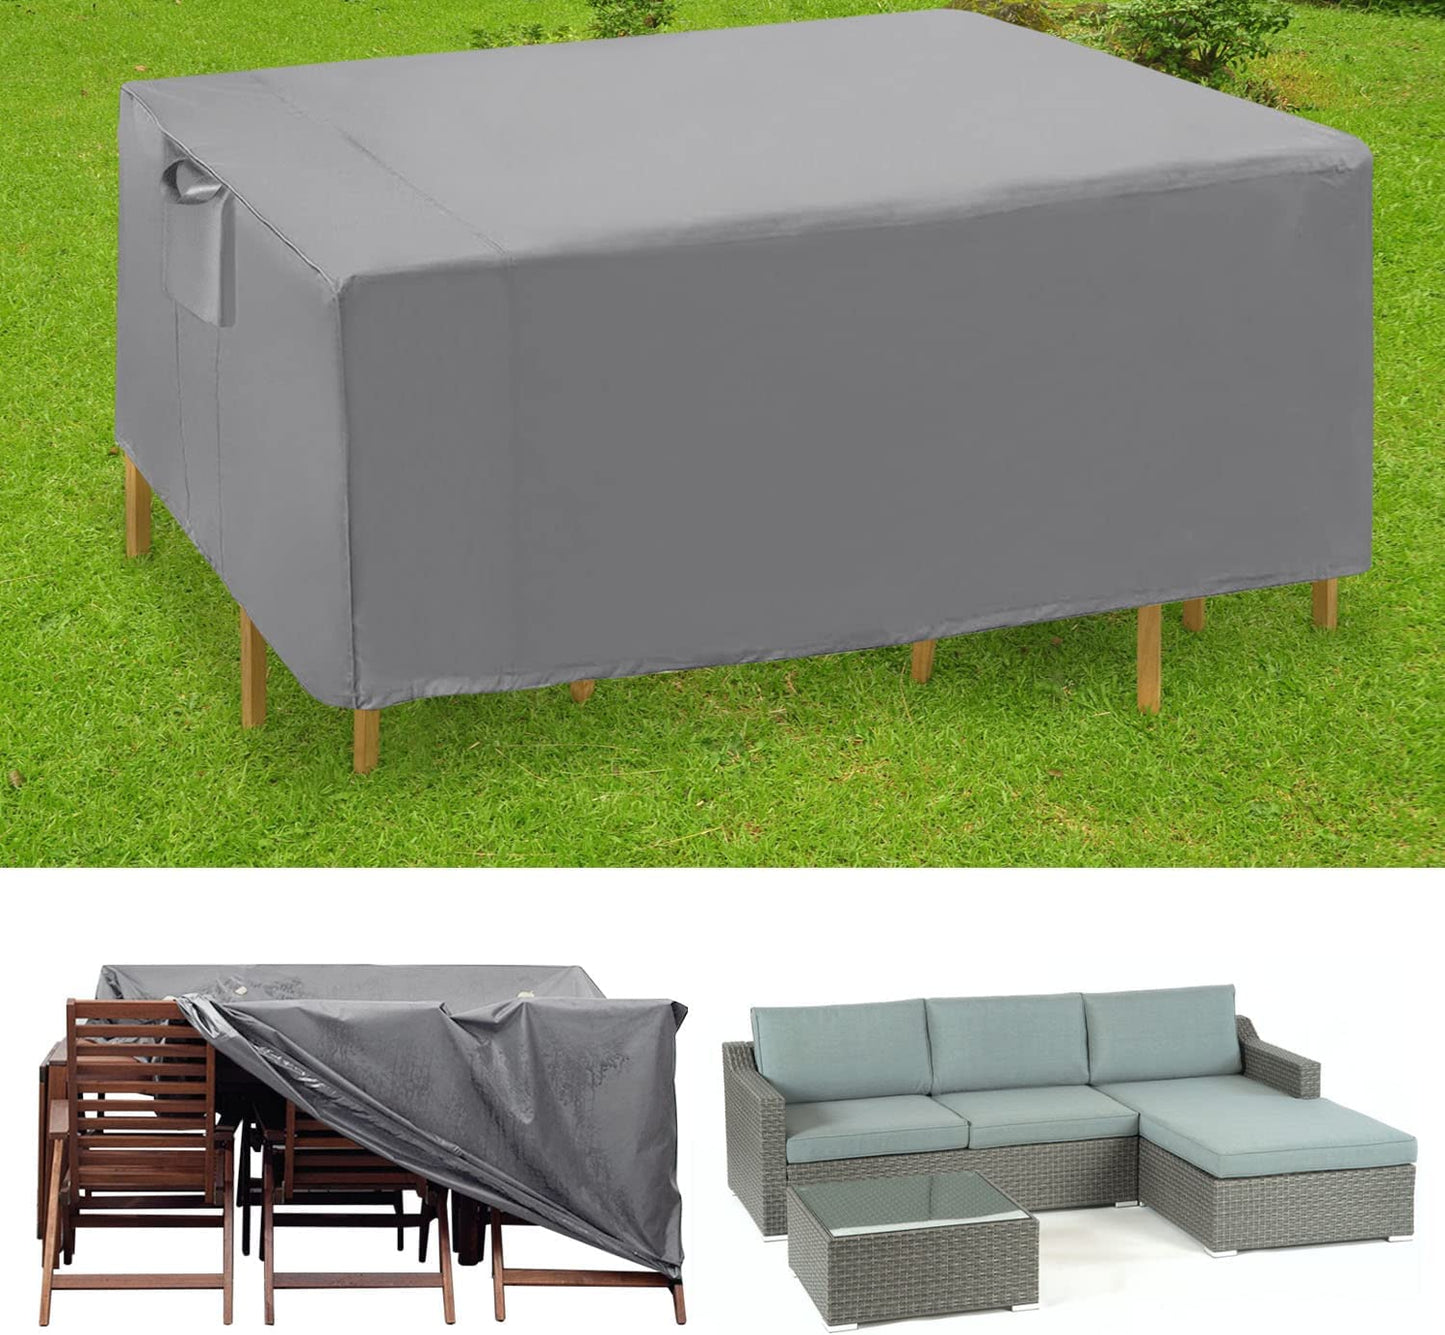 Patio Furniture Covers, Waterproof Outdoor Table Cover 600D Heavy Duty Rectangle Outdoor Sectional Couch Sofa Cover with 4 Windproof Buckles